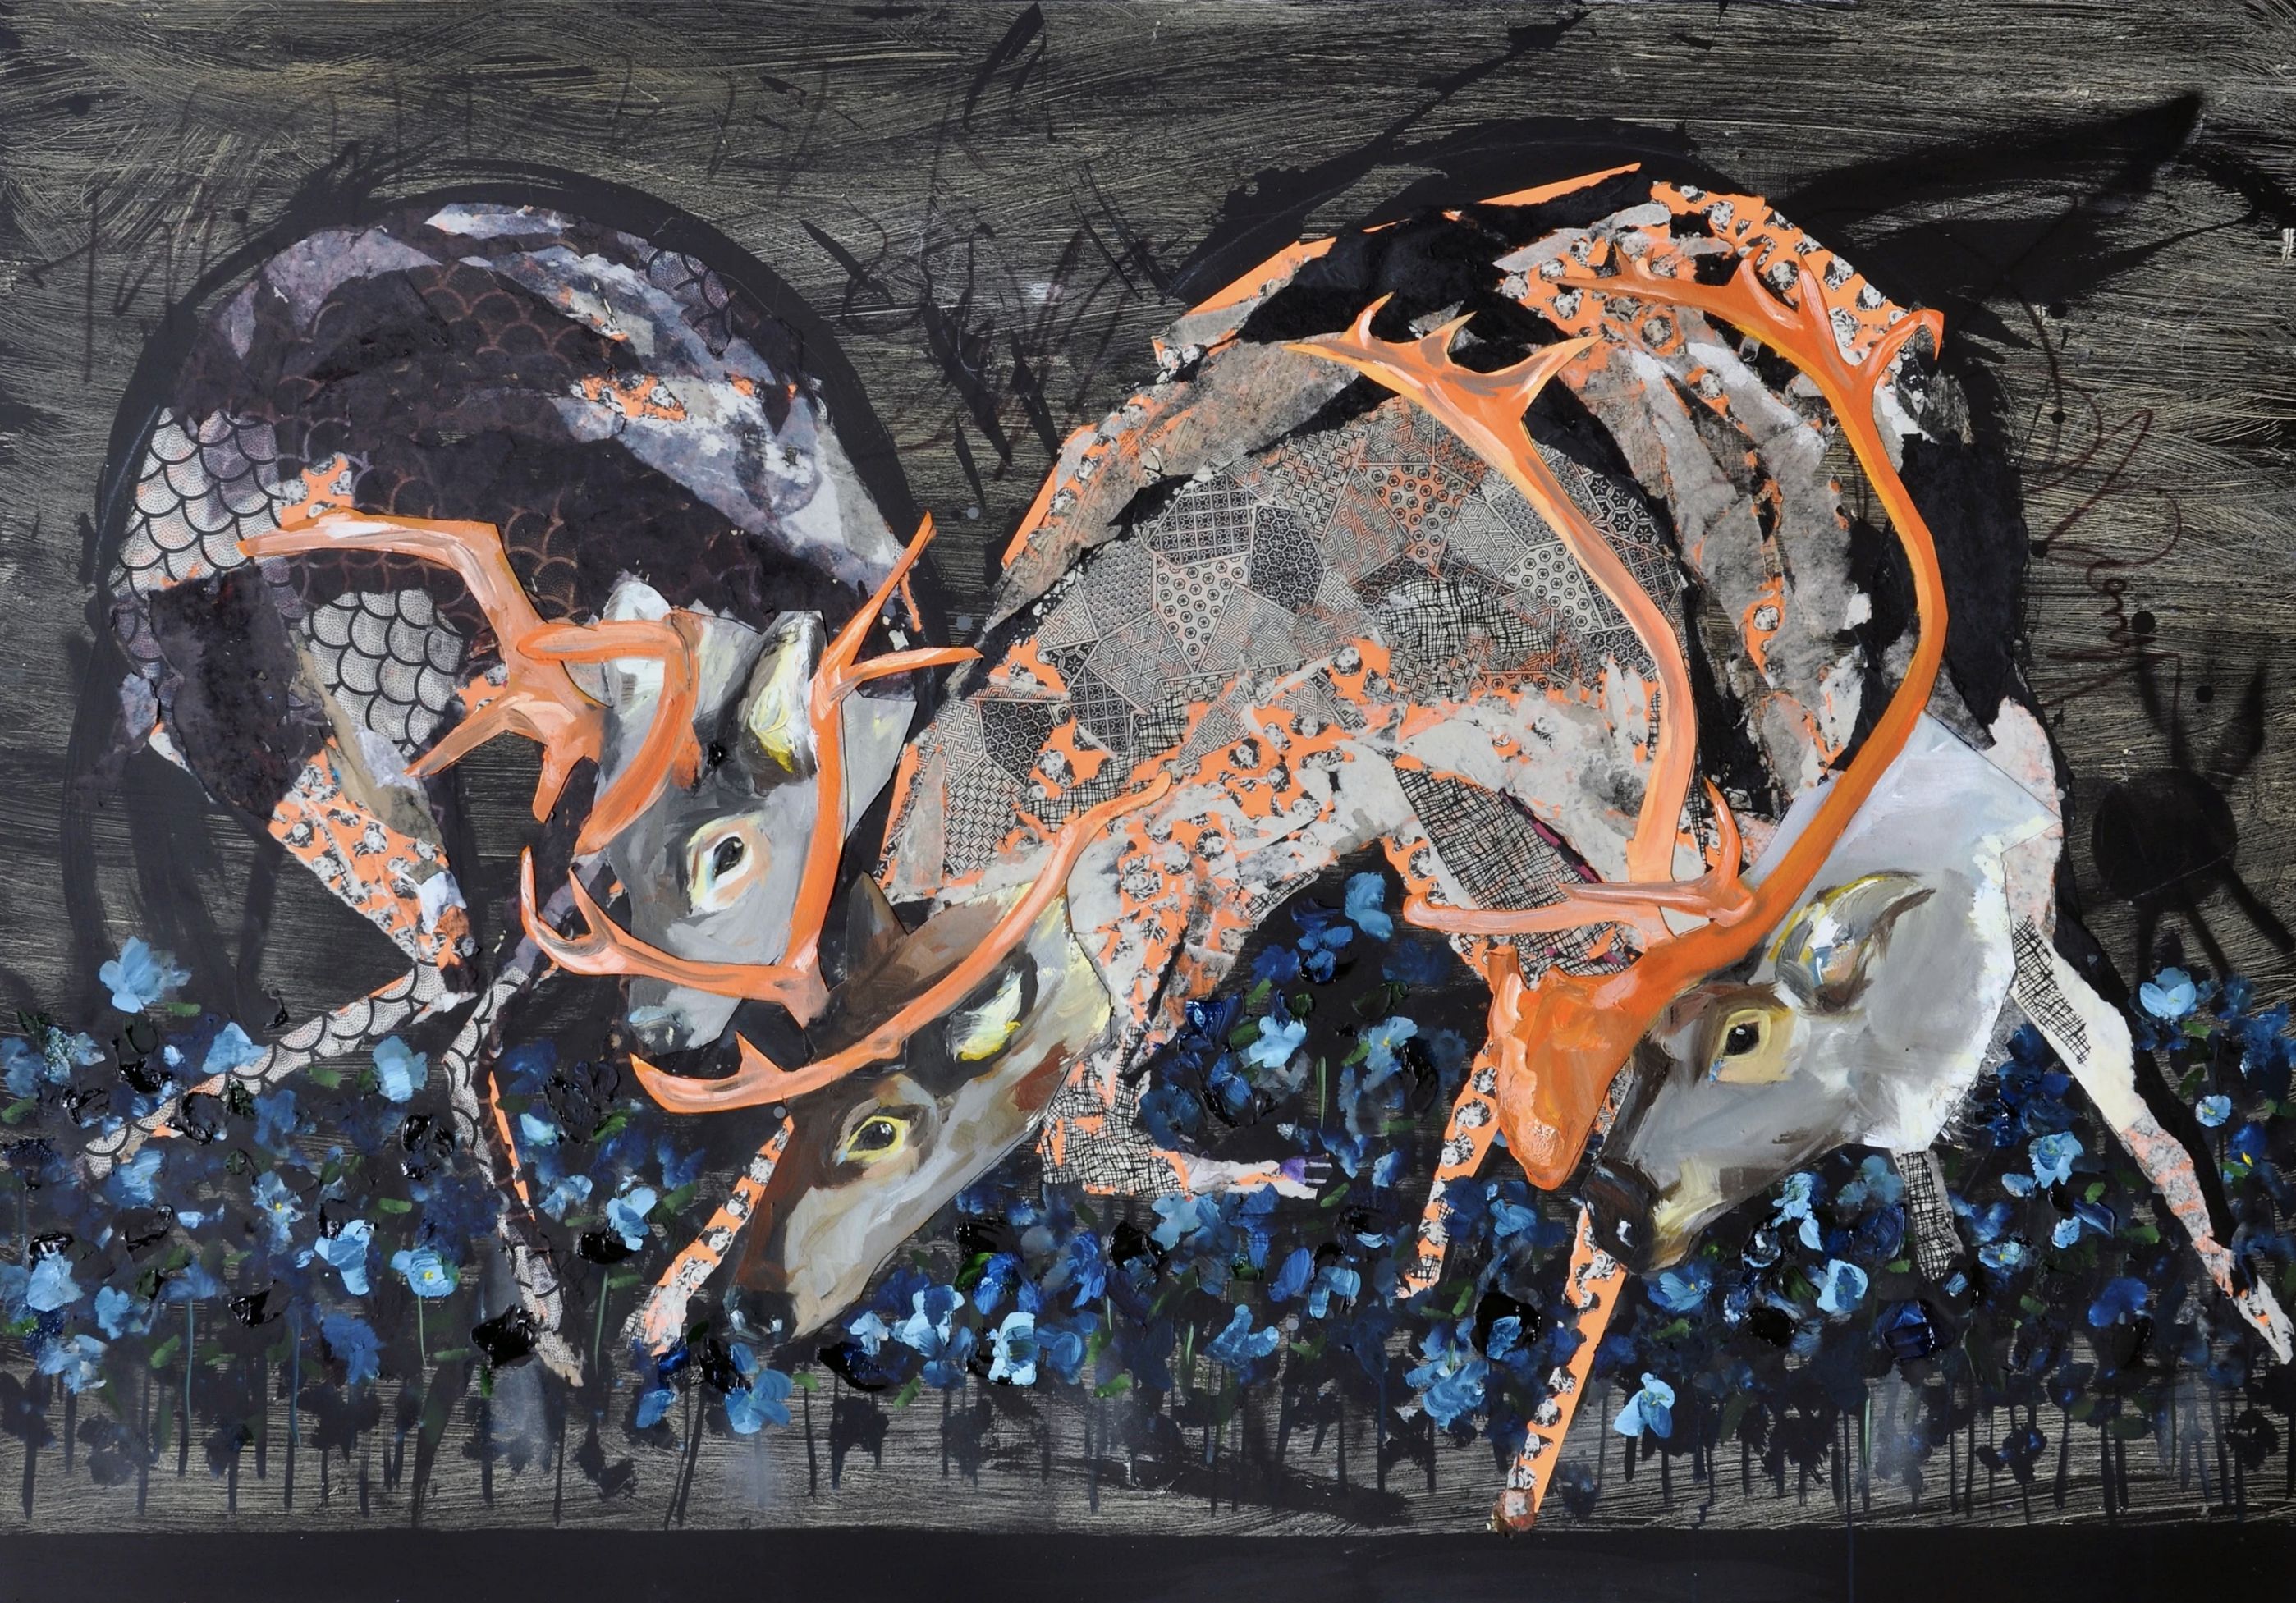 Kirin 2016 (44"x66") Mixed media collage and oil on panel board.